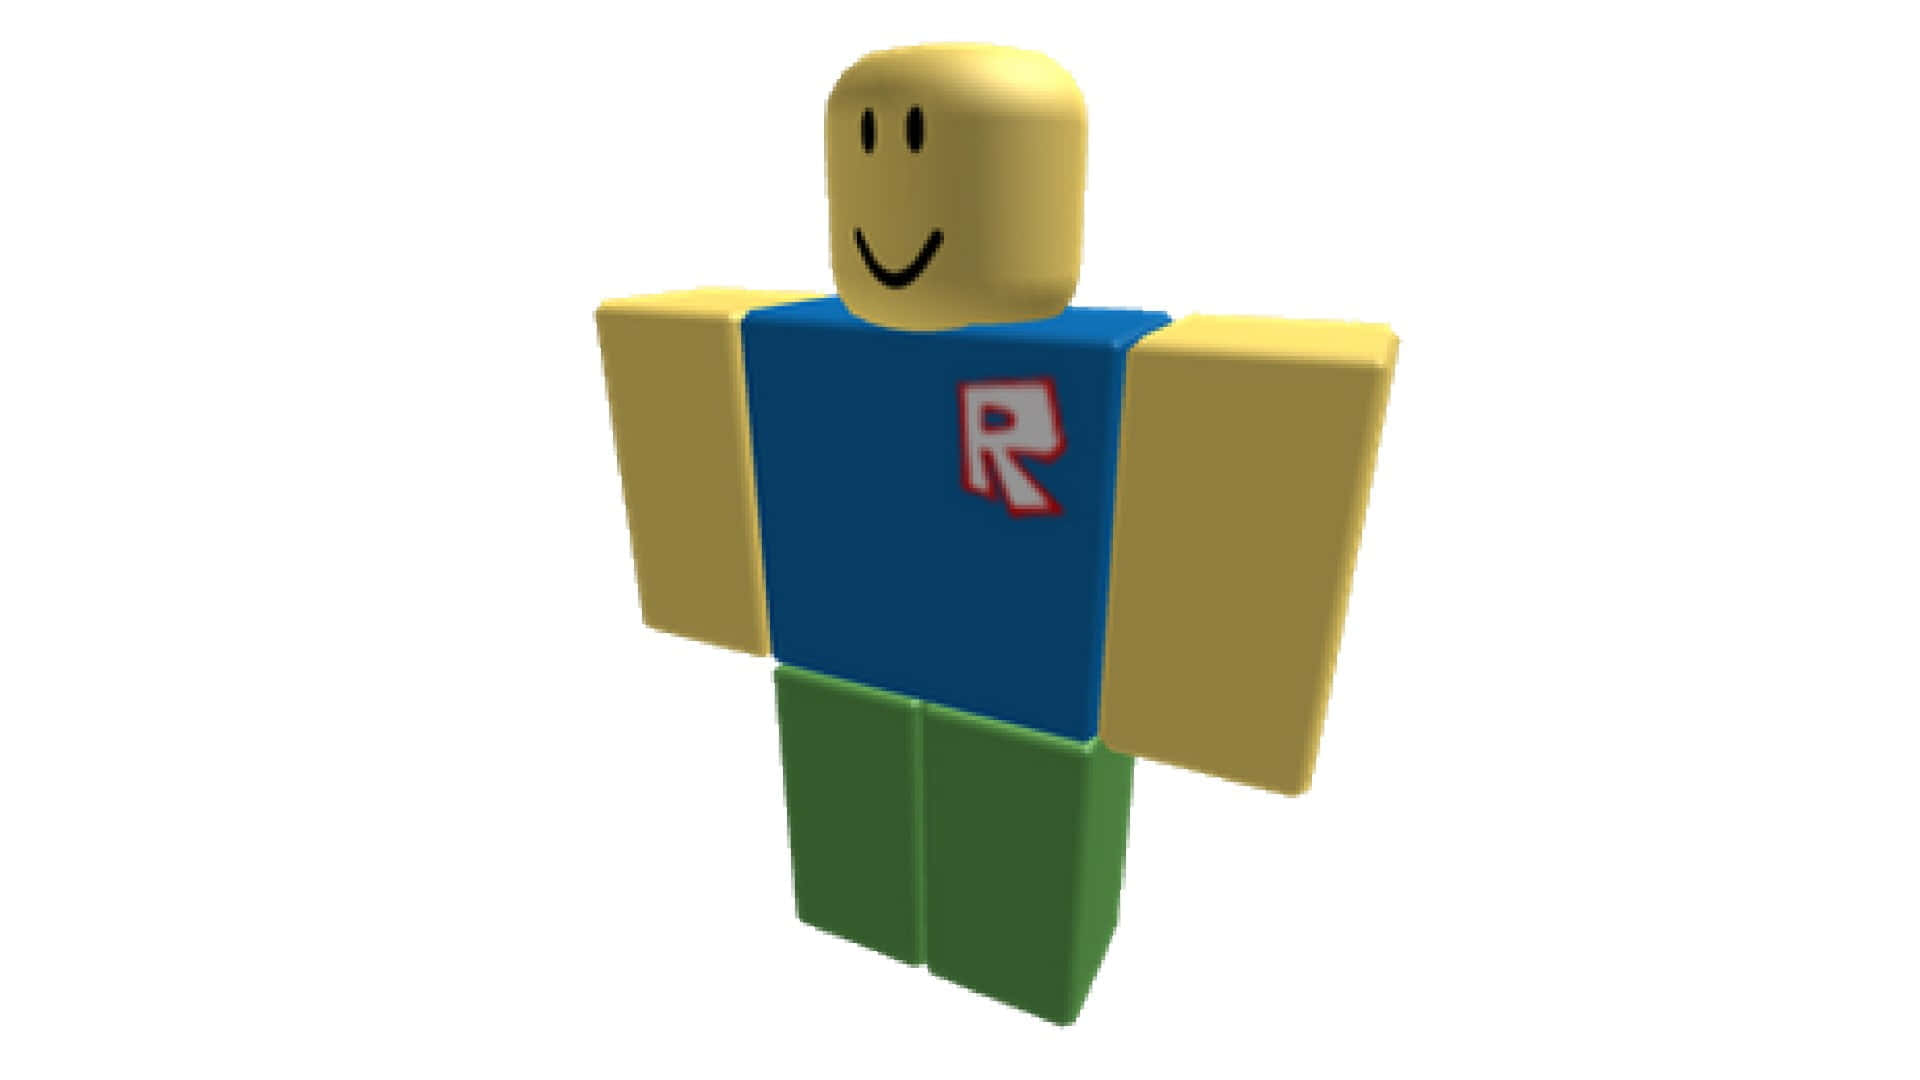 100+] Cute Roblox Noobs Wallpapers